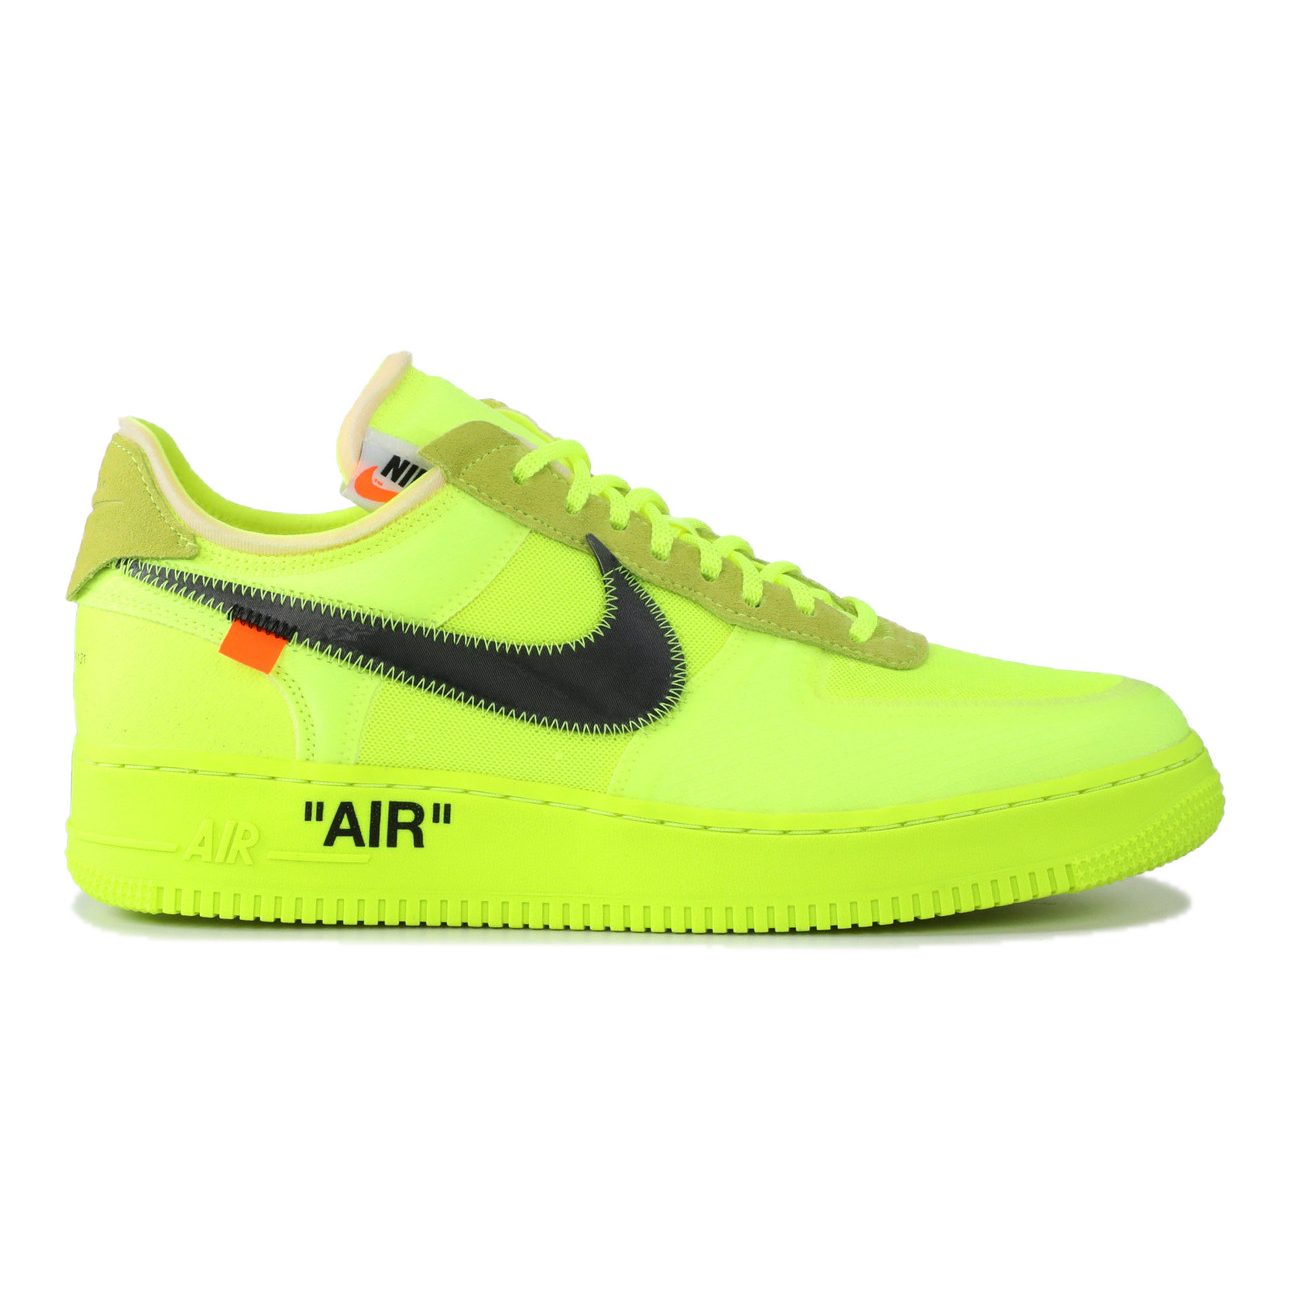 The 10: Nike Air Force 1 Low OFF WHITE - Volt - Used